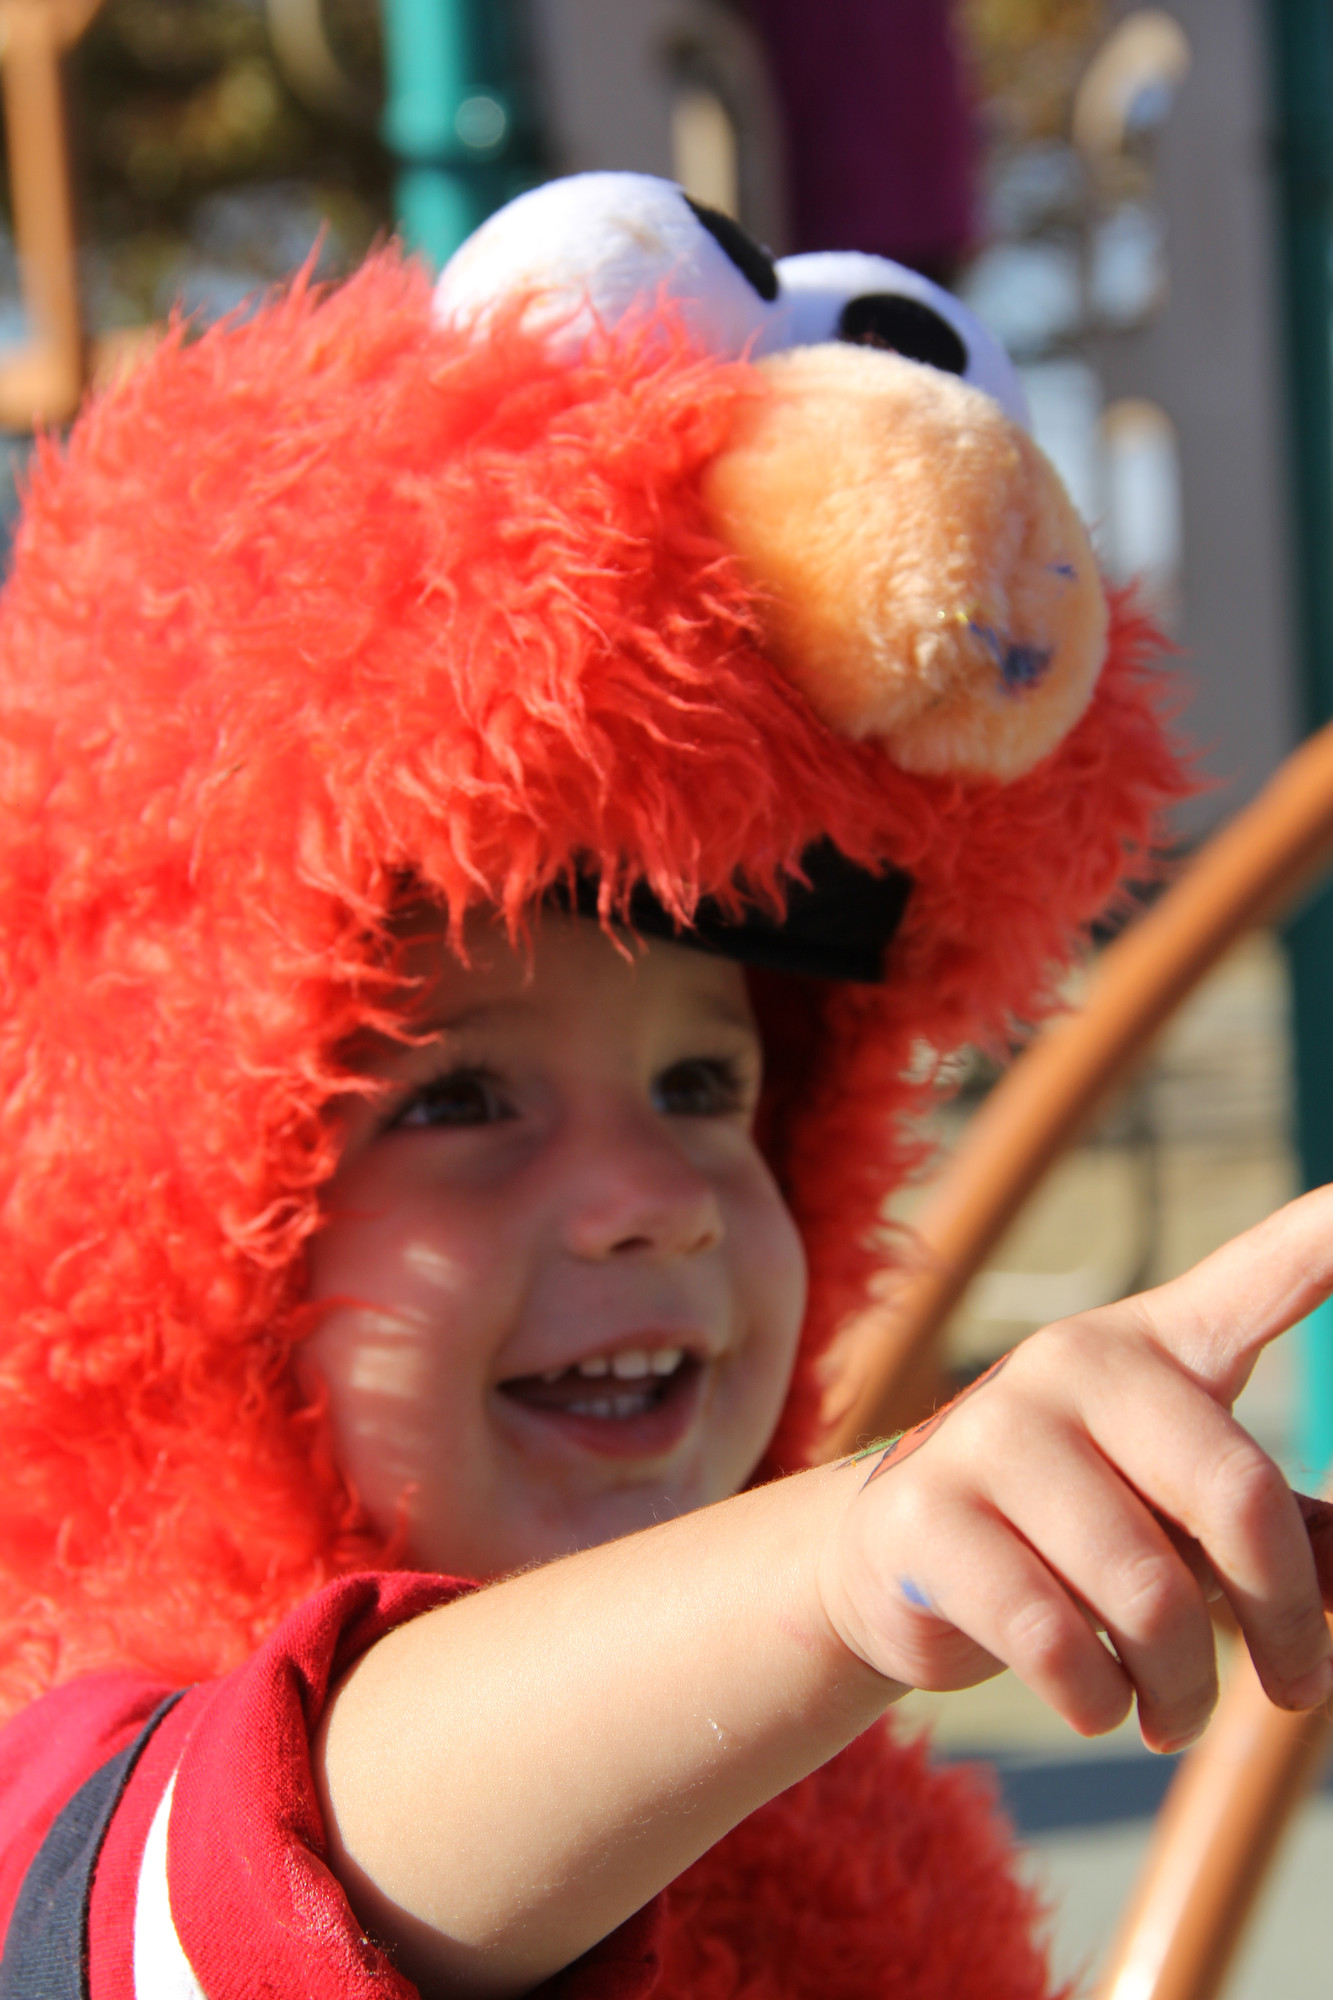 Kevin Lane, the cutest Elmo to ever exist, had a great time at the LOMS Halloween Festival.